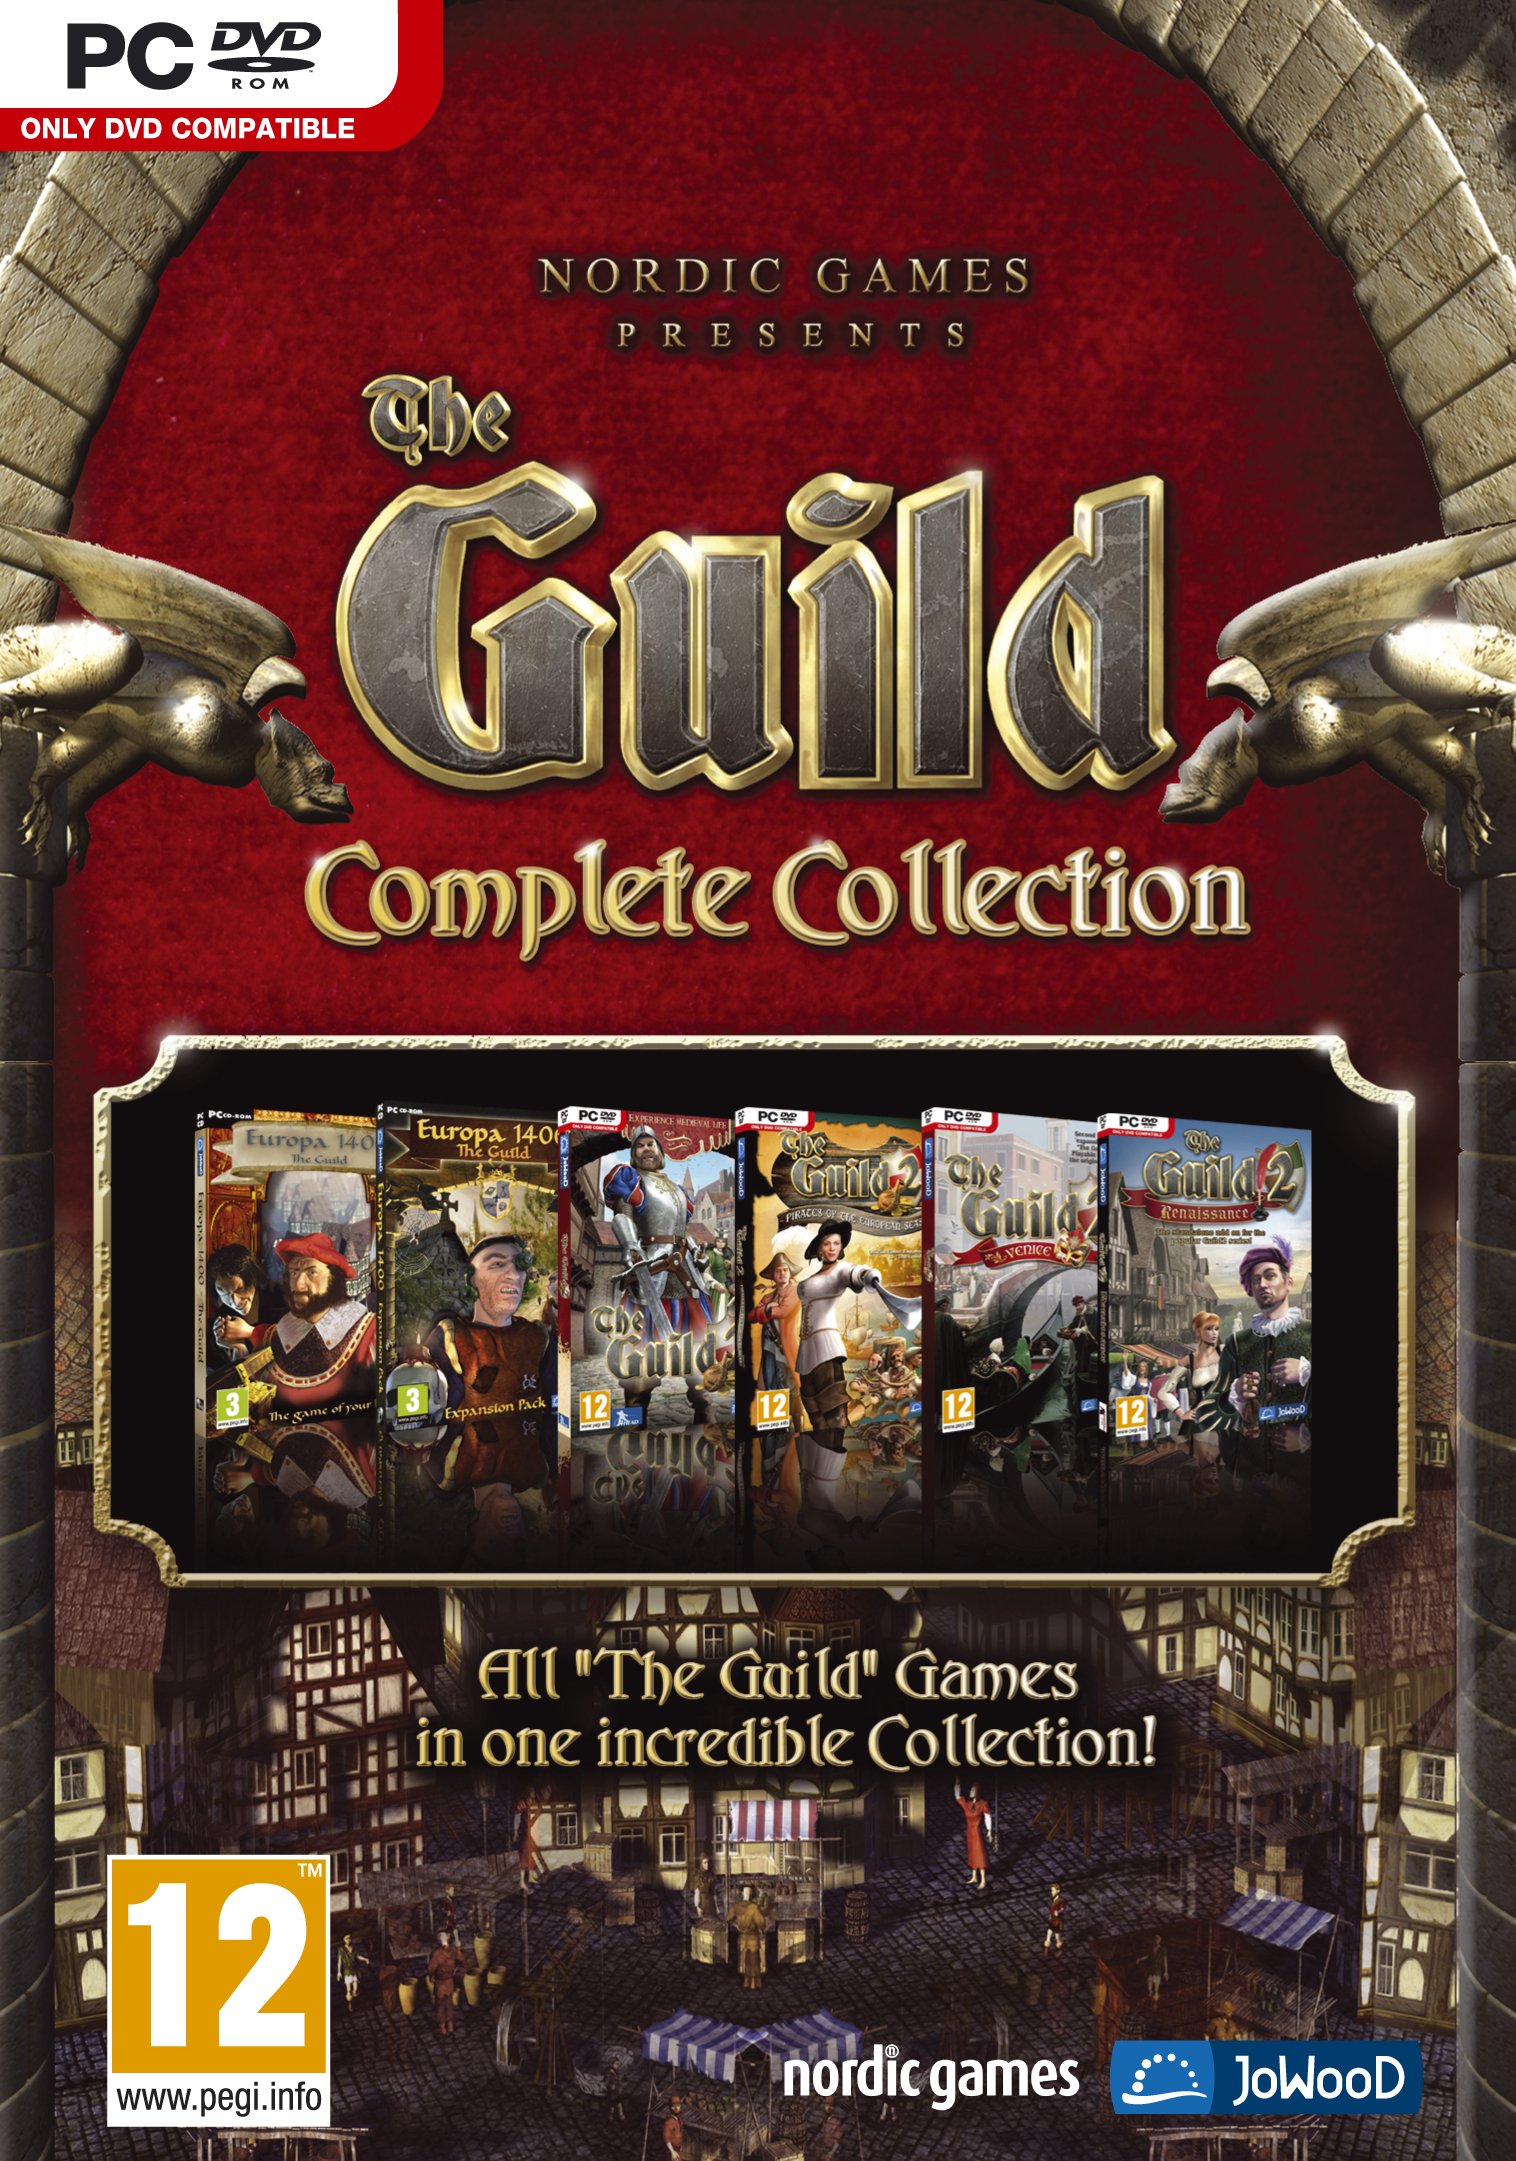 Complete edition game. The Guild complete collection. Complete collection. Complete игра. JOWOOD игры.